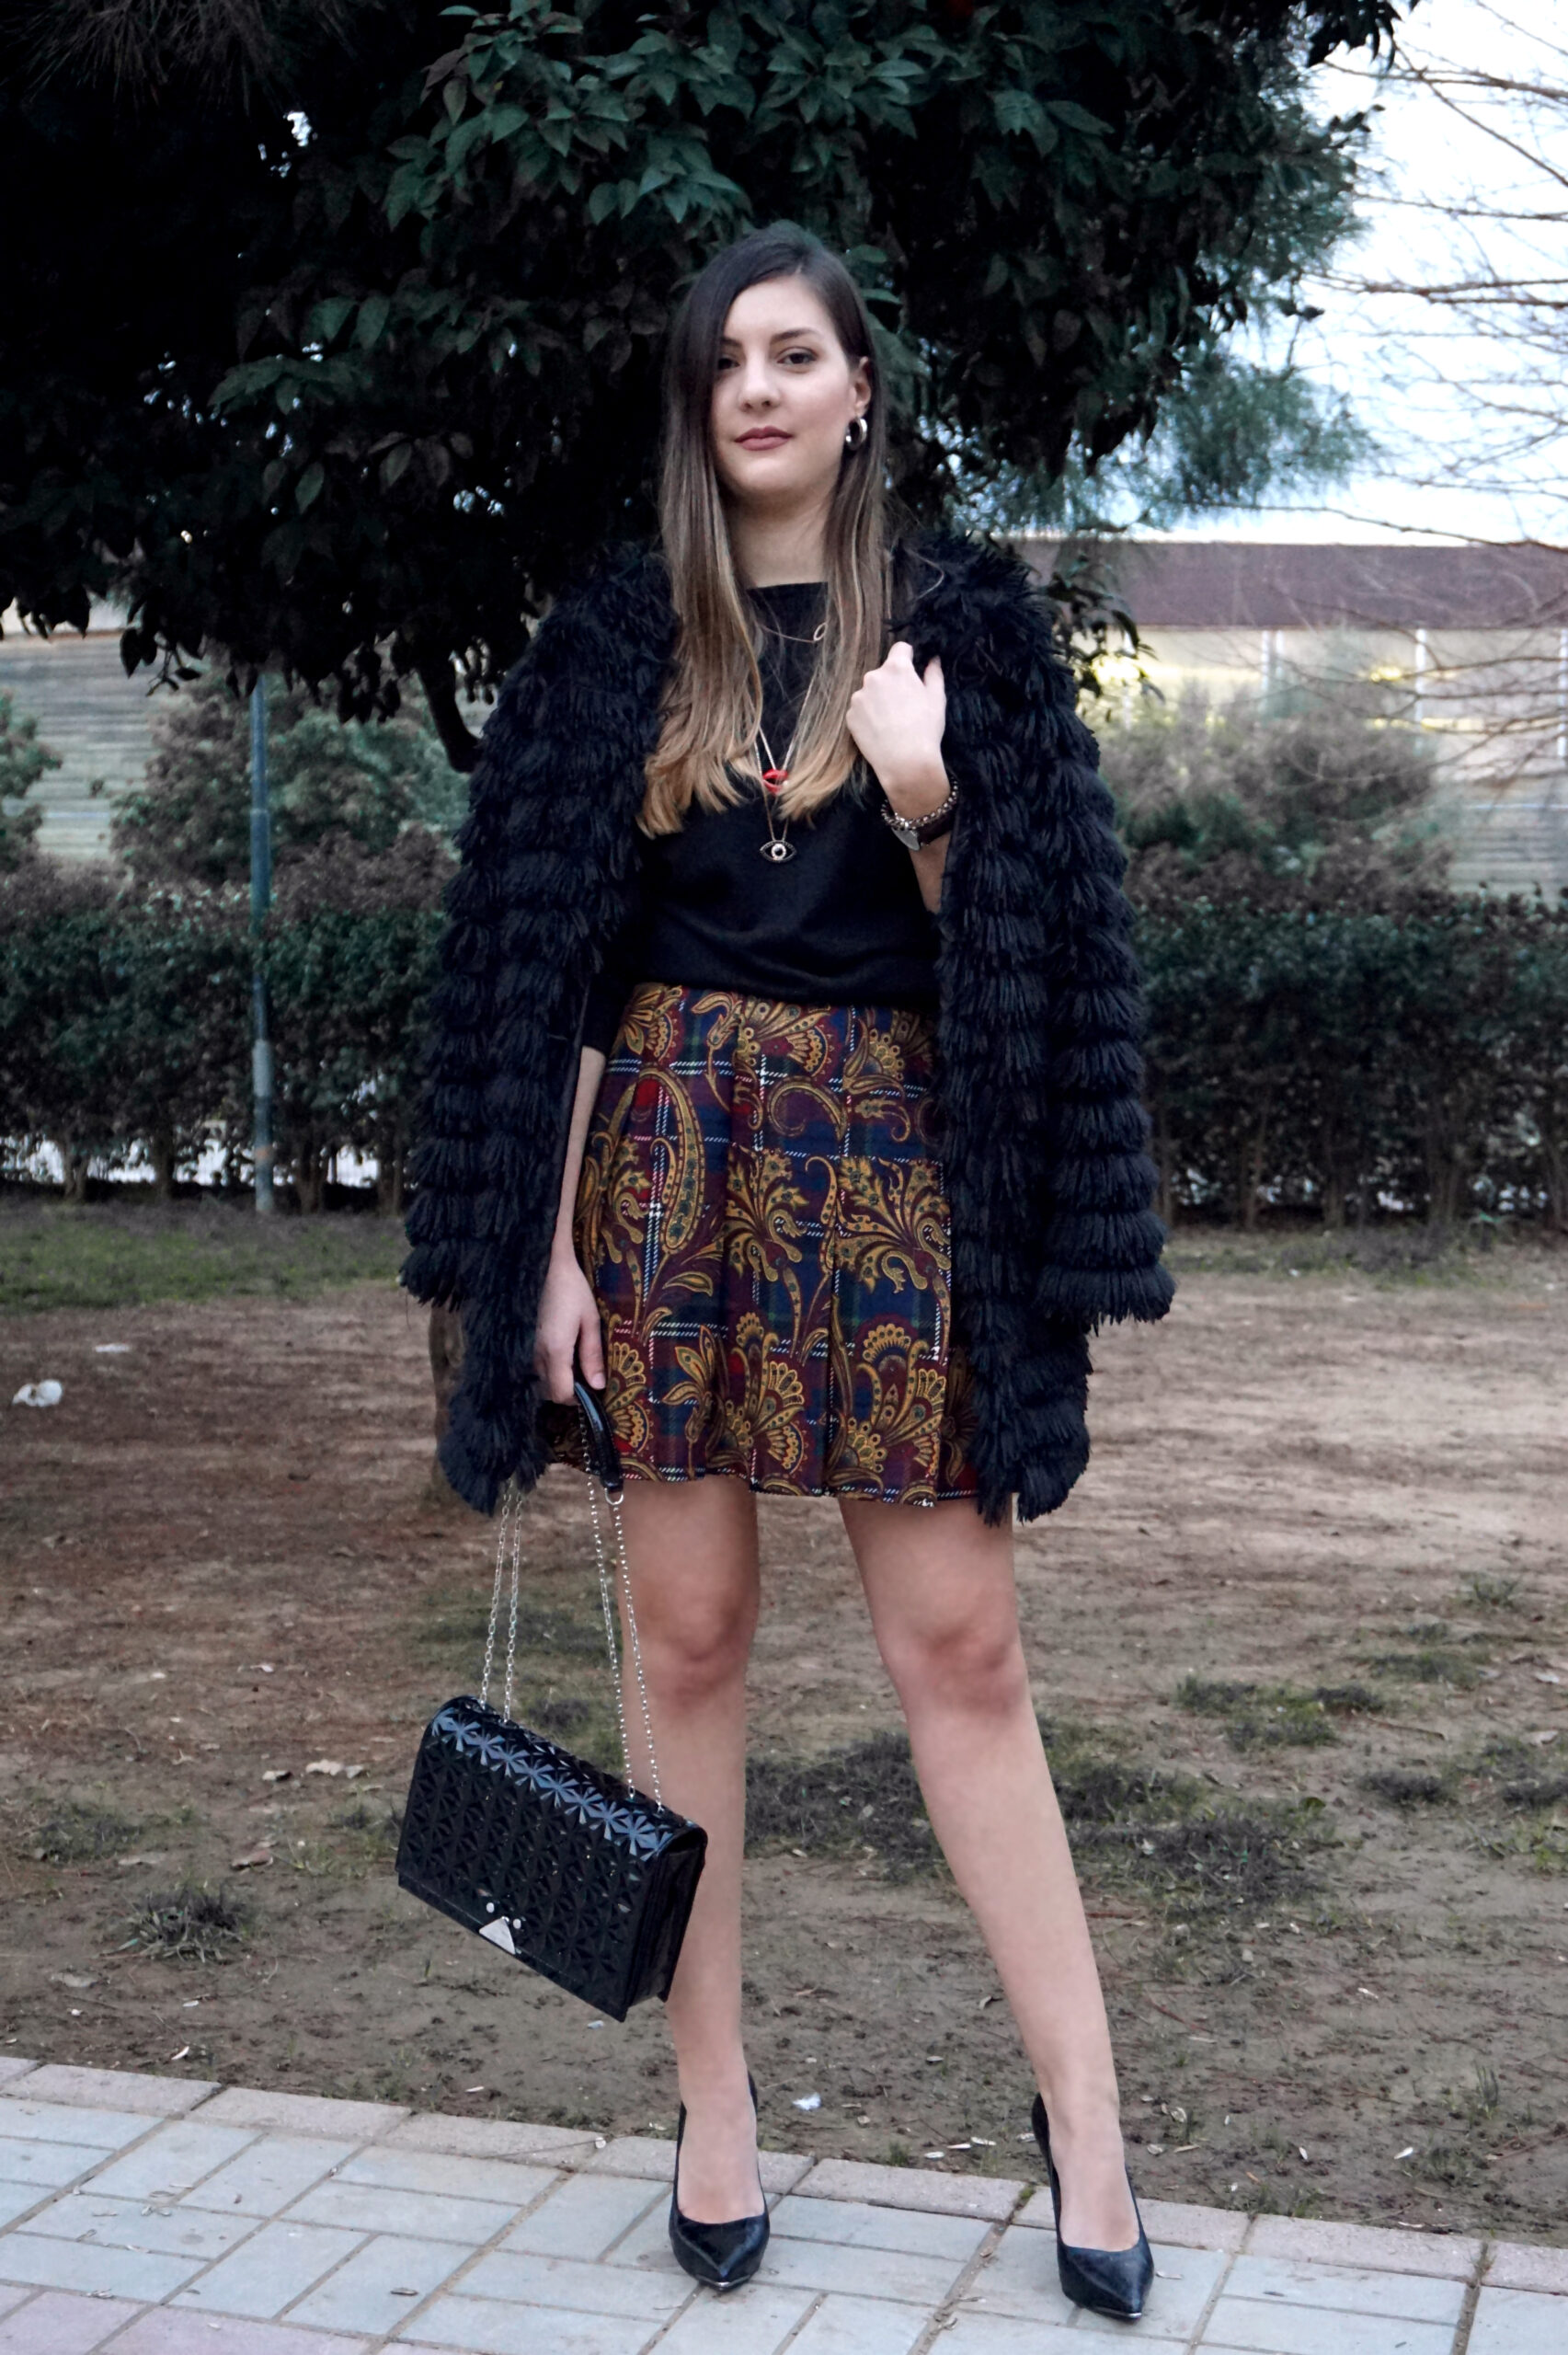 how to wear skirts in winter